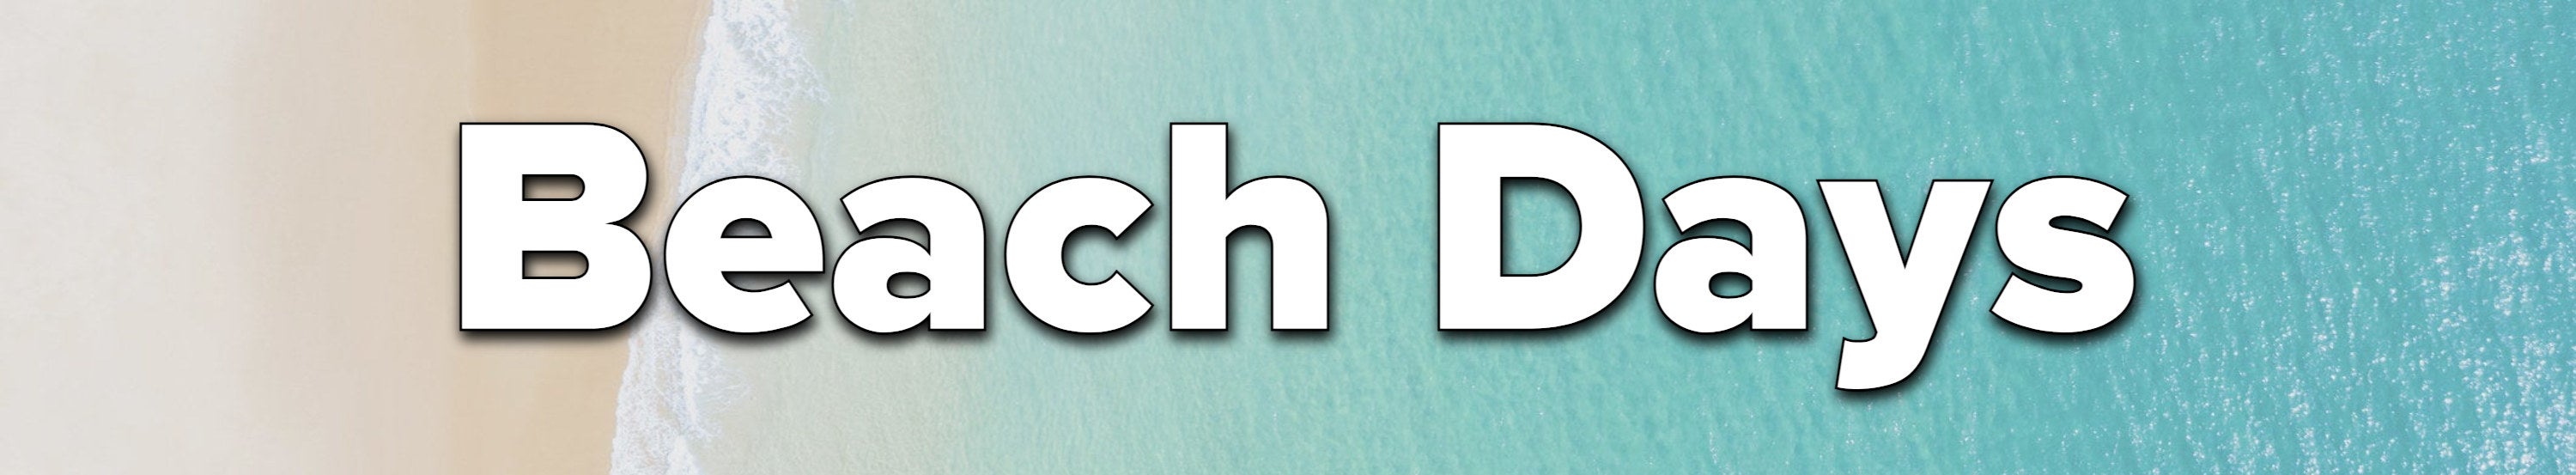 &quot;Beach Days&quot; text set on a photo of a beach from above